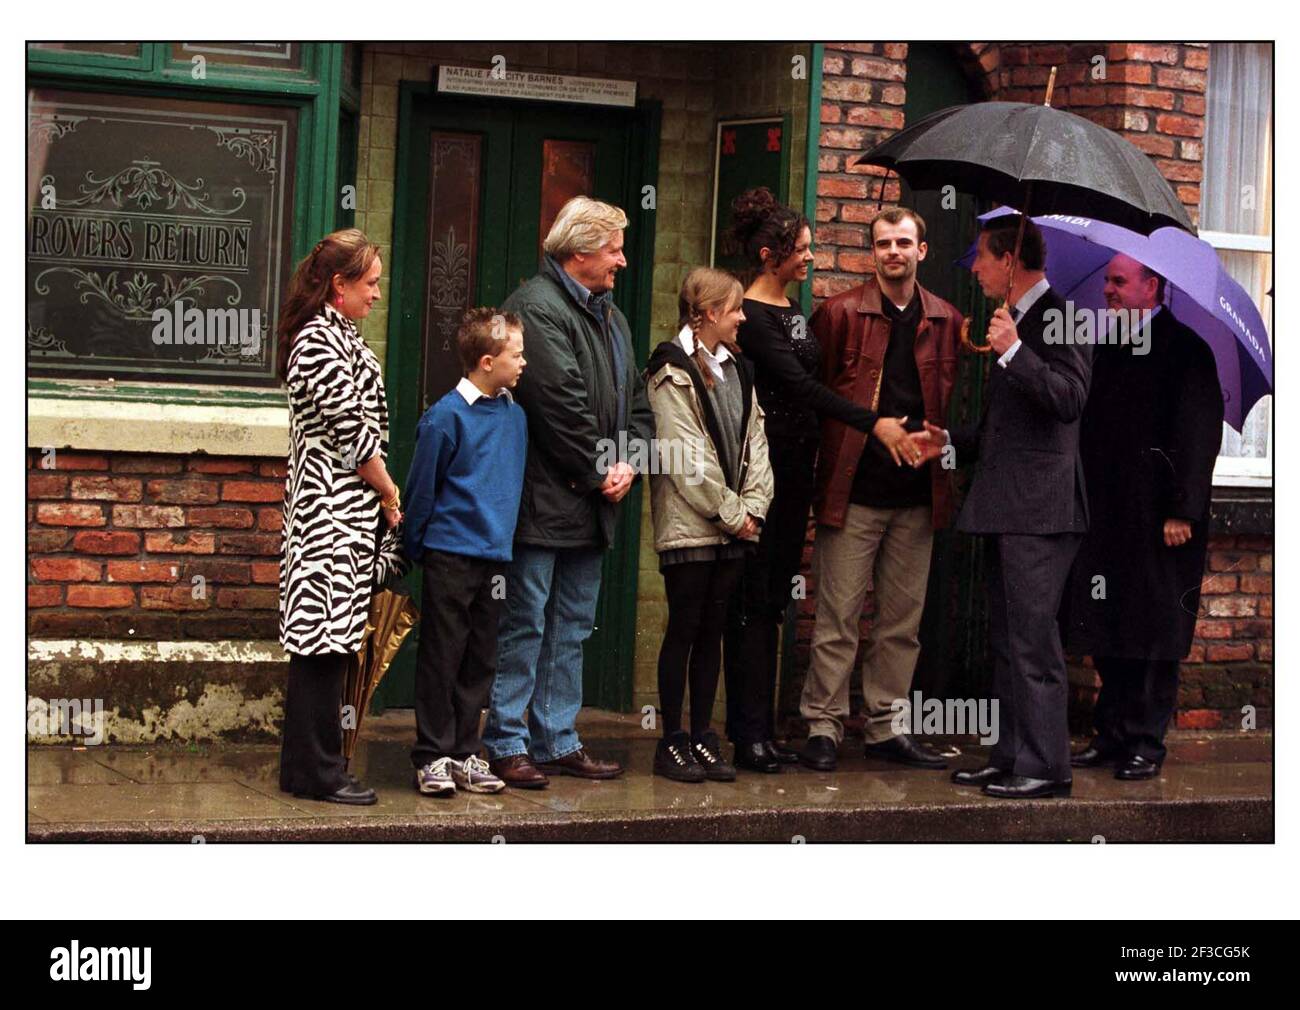 H.R.H. The Prince of Wales today visited the set of Coronation Street to  mark the occasion of the programs 40th anniversary. H.R.H. took part in  celebrations and met cast and crew as